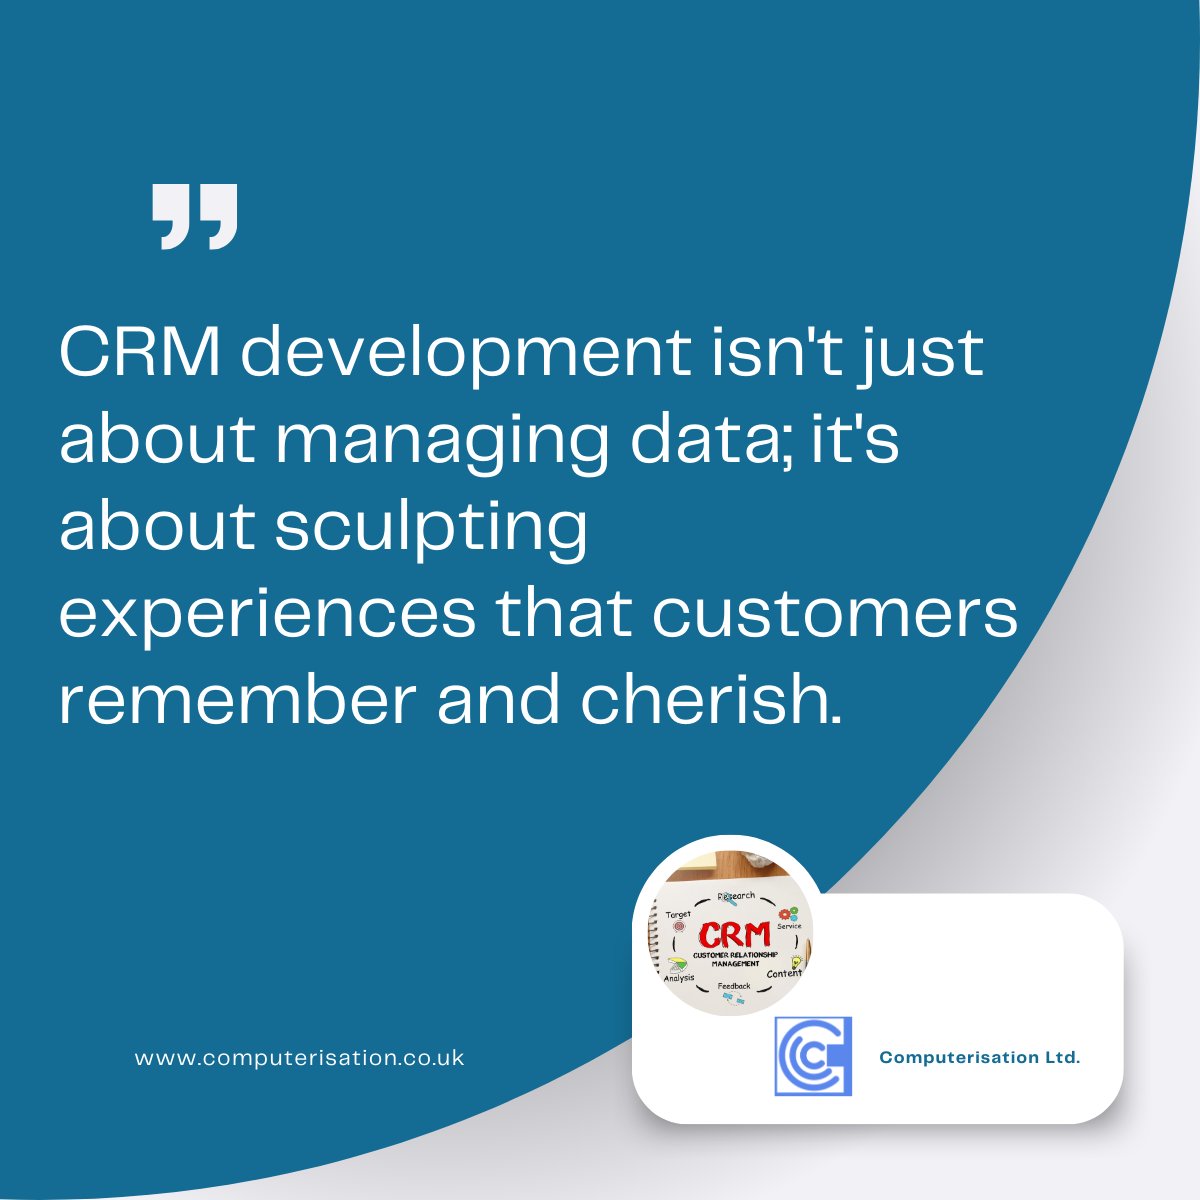 CRM is not just a Tool, It is way more than that...
#crm #CRMdeveloper #CRMUK #CRMdevelopment